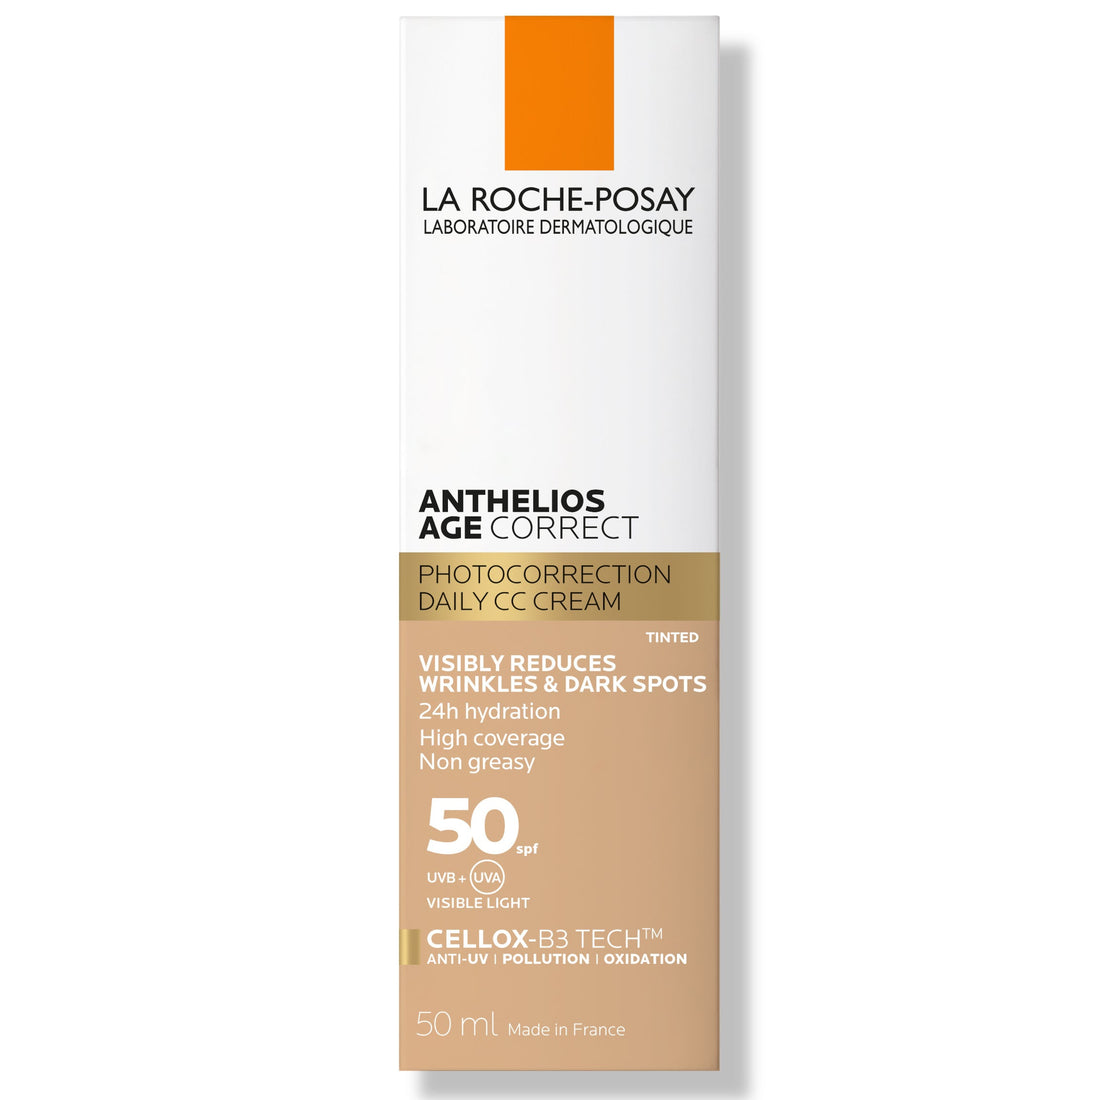 La Roche-Posay Anthelios Age Correct SPF50+ Anti Ageing Tinted Sunscreen with Niacinamide 50ml